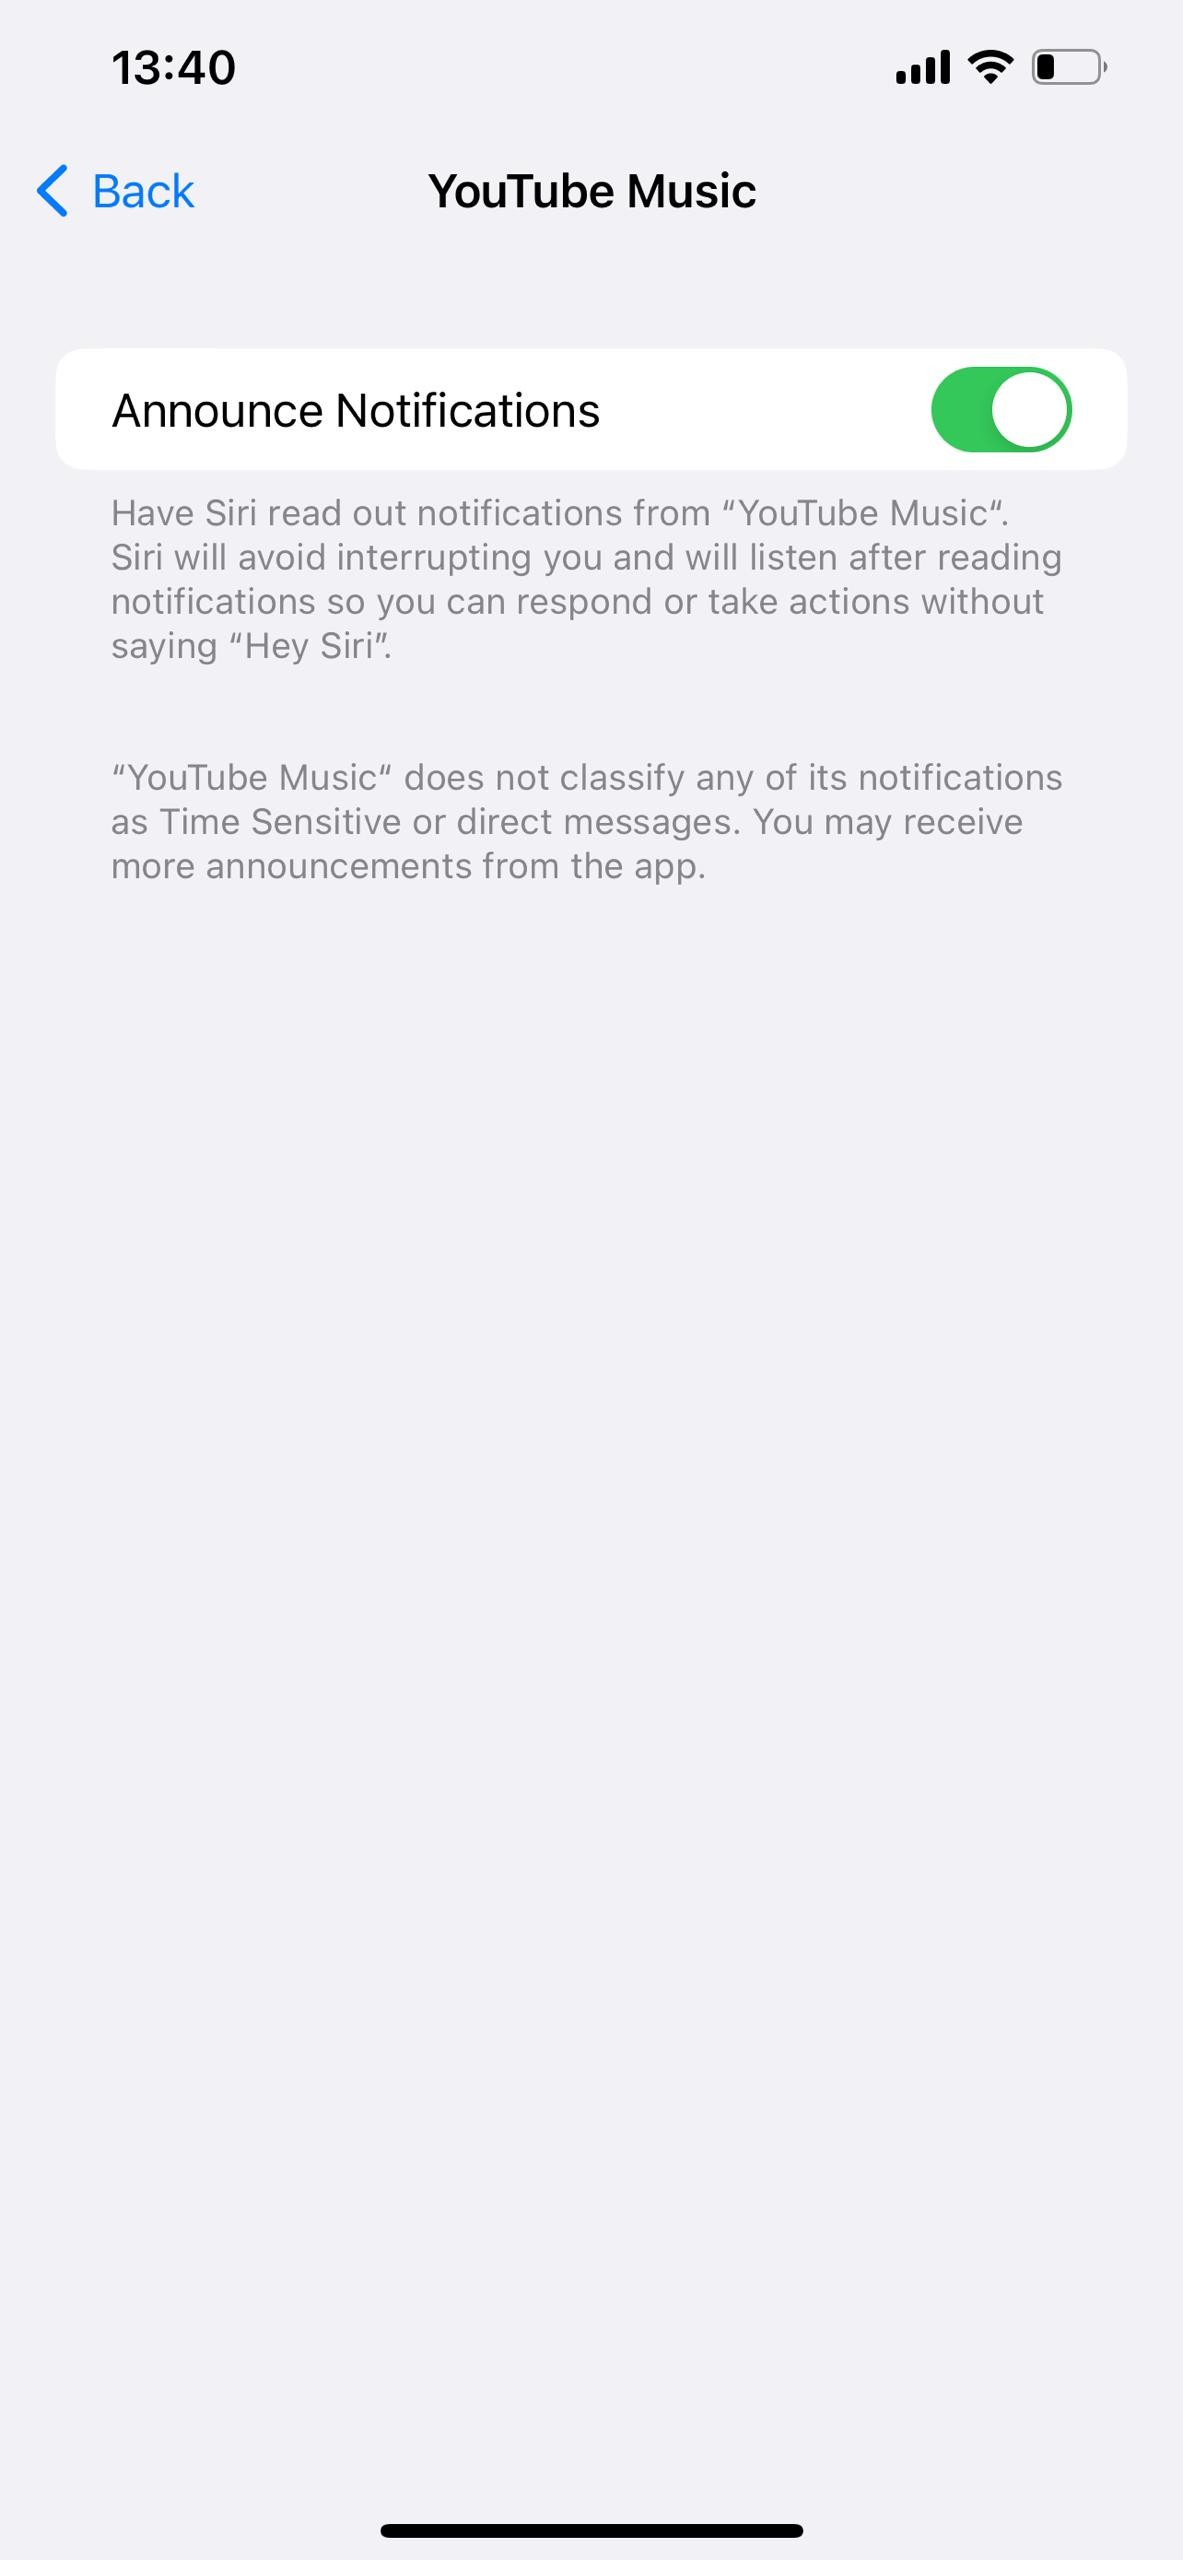 iPhone Announce Notification settings for YouTube Music